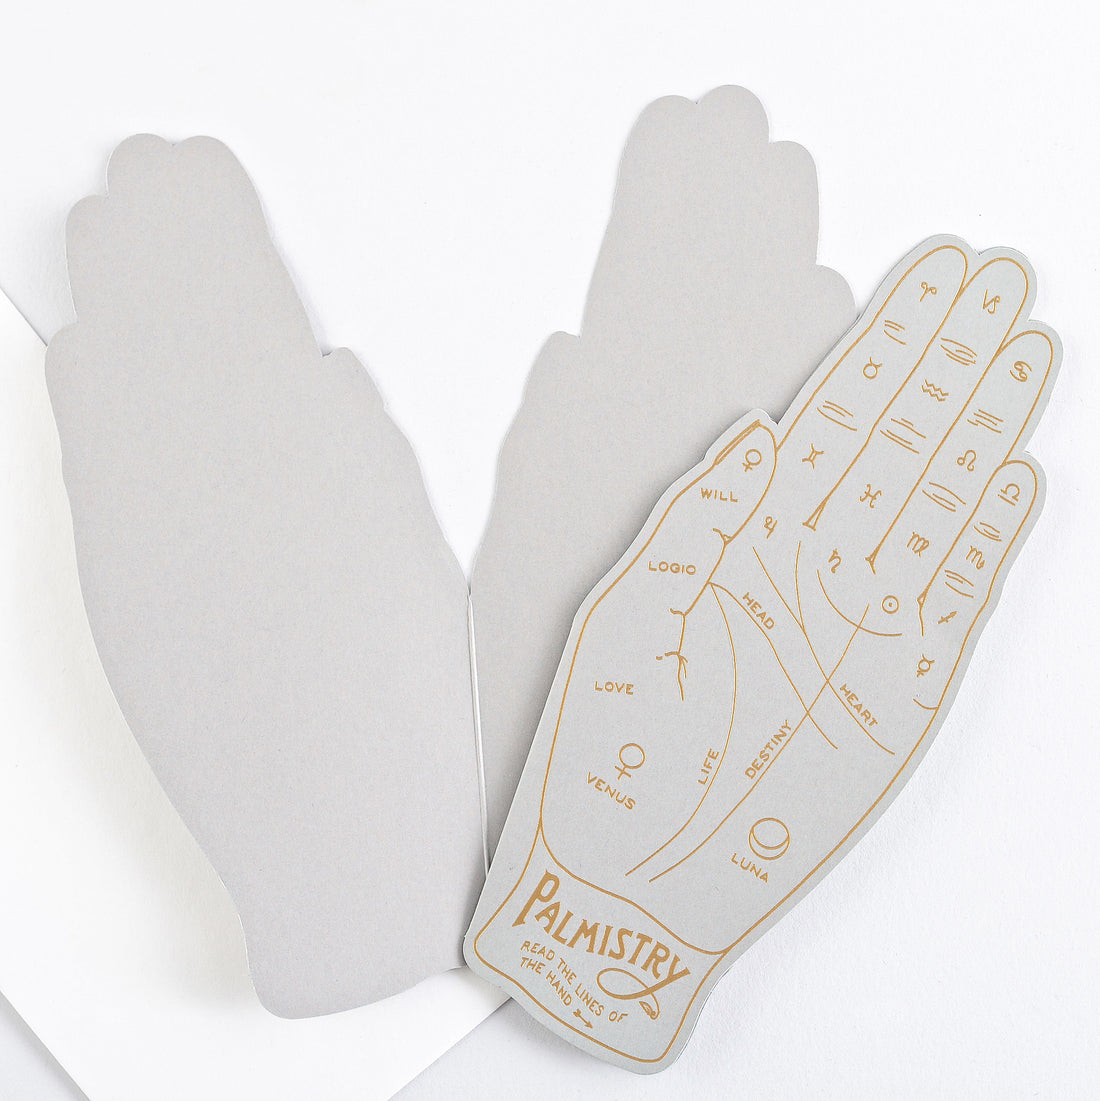 Noat Palmistry Greeting Card 